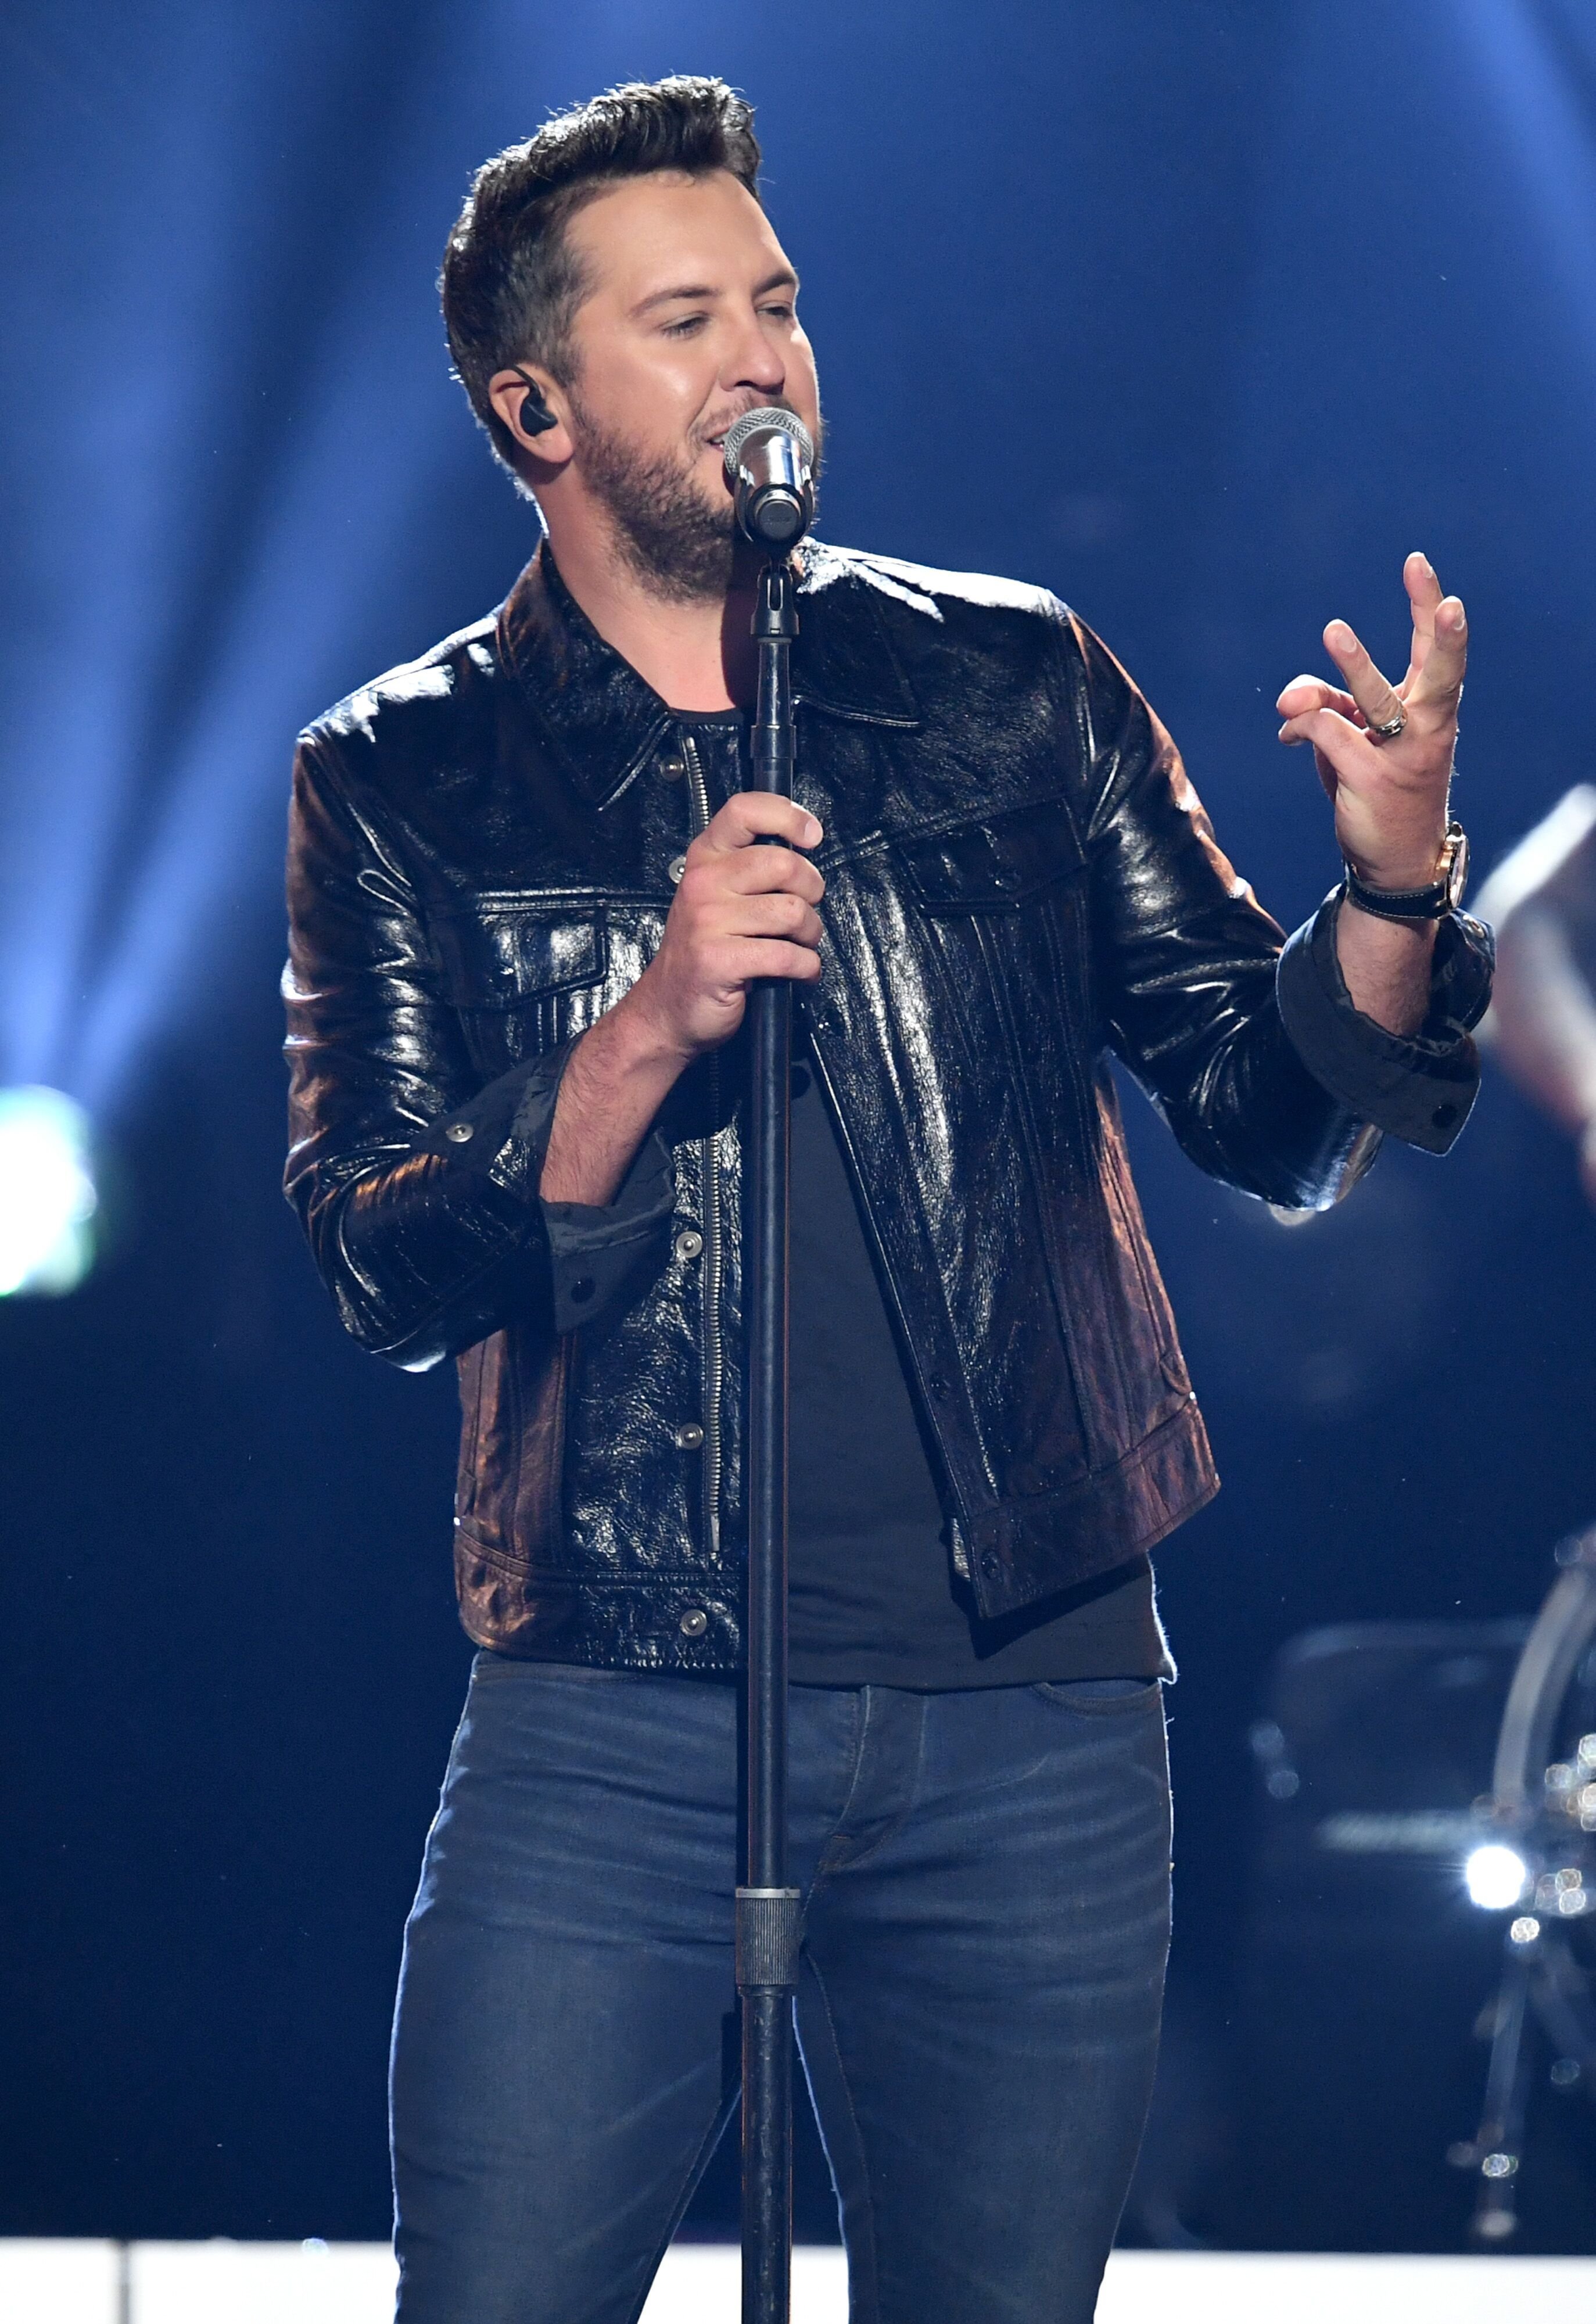 Luke Bryan performs onstage during the 54th Academy Of Country Music Awards at MGM Grand Garden Arena on April 07, 2019 in Las Vegas, Nevada | Photo: Kevin Winter/Getty Images